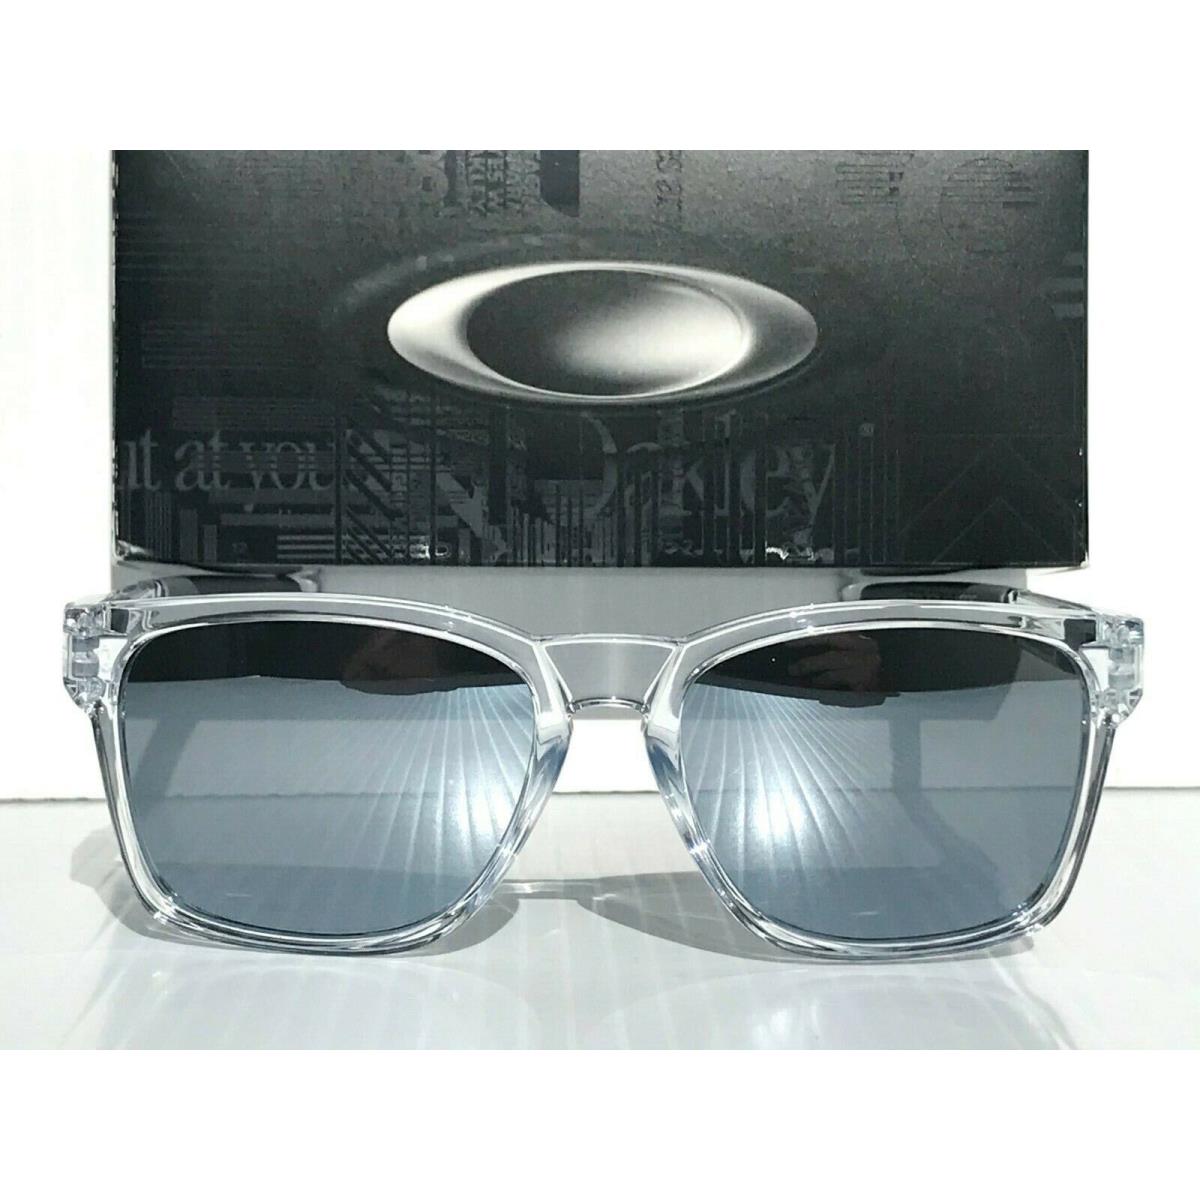 Oakley sunglasses Catalyst - Clear Frame, Silver Lens, Clear Manufacturer